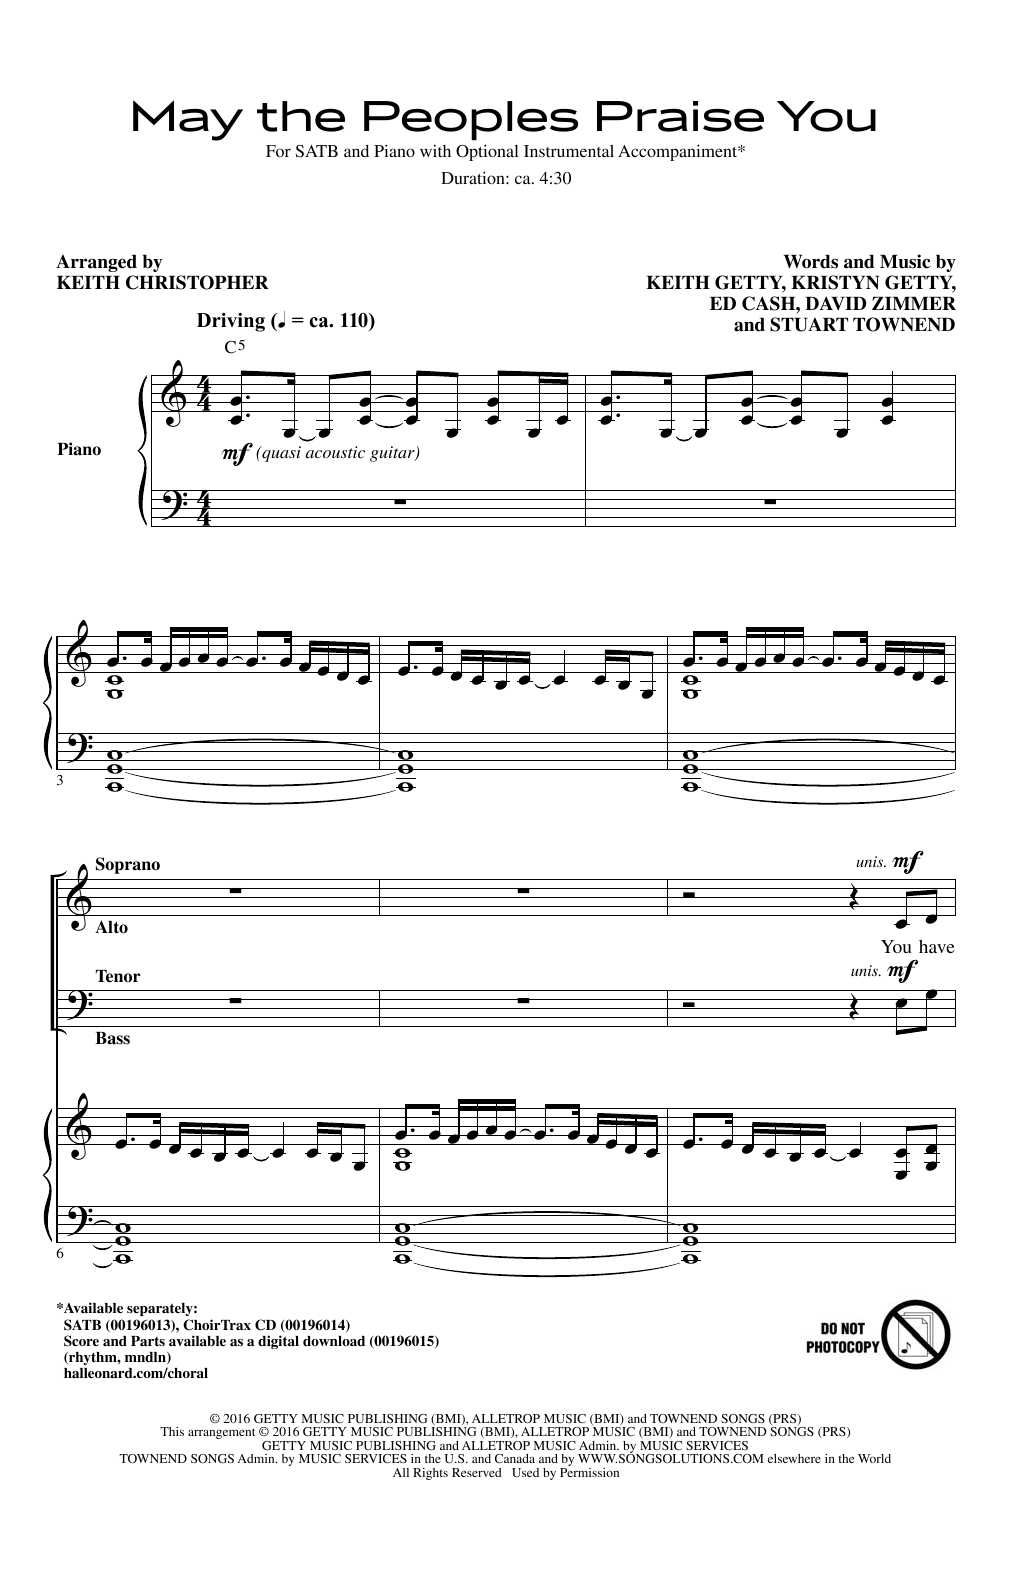 Download Keith Christopher May The Peoples Praise You Sheet Music